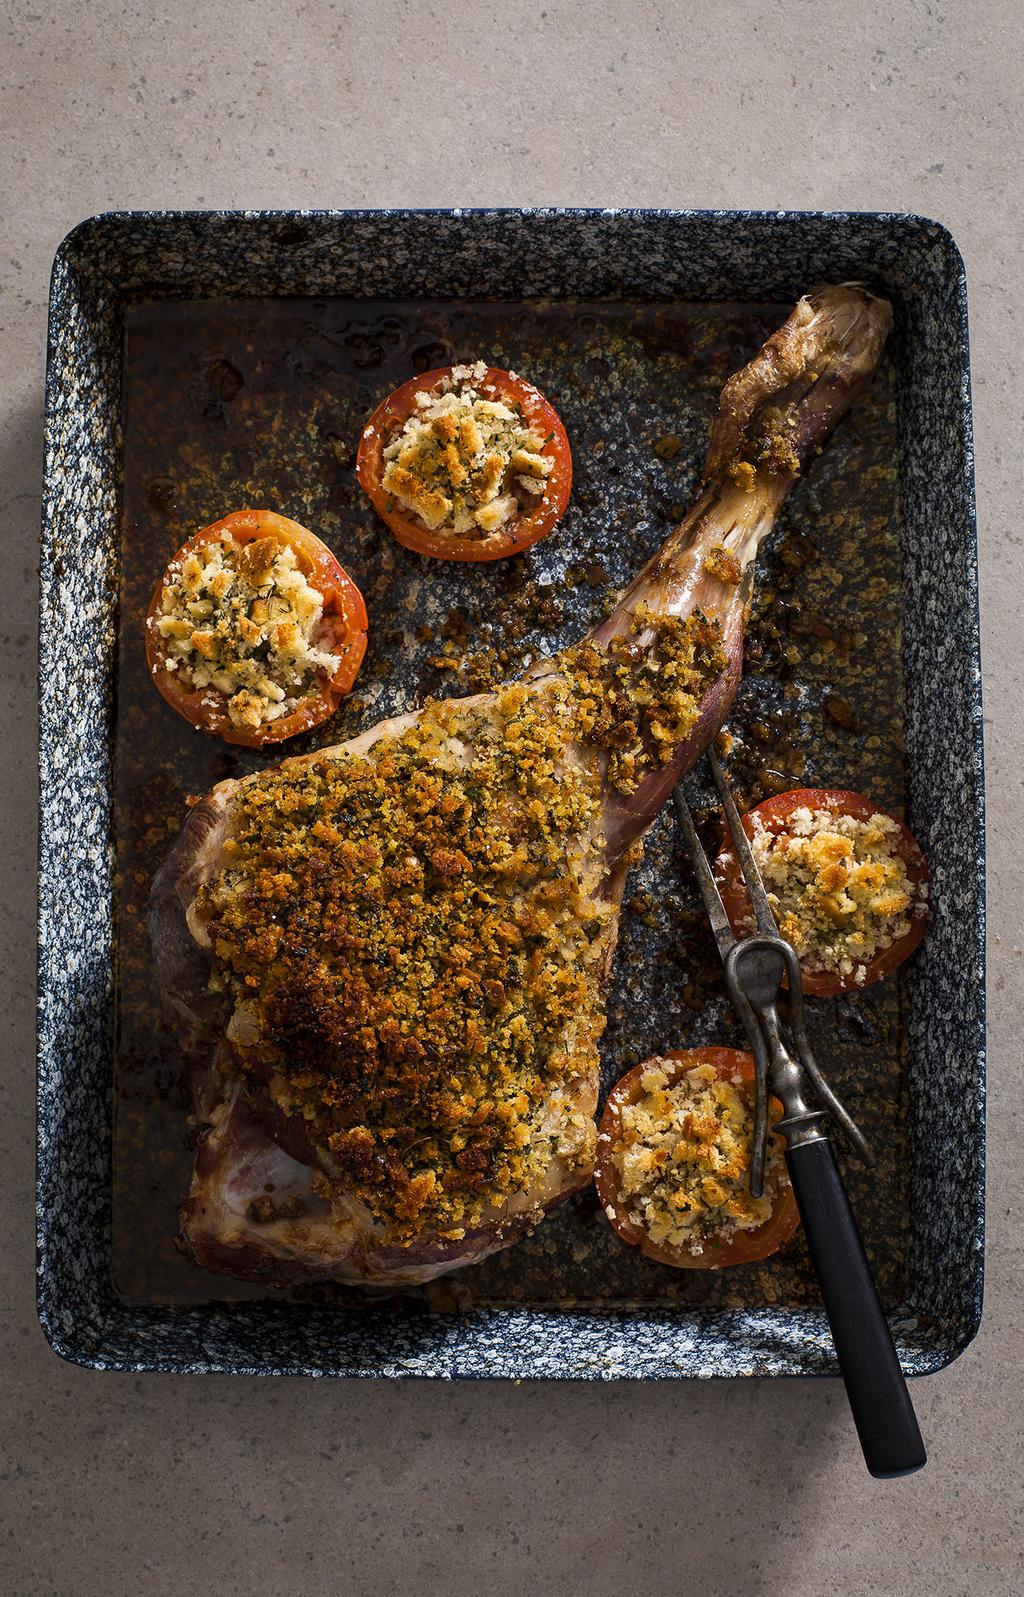 Cosciotto in crosta d erbe Roasted Leg of Lamb in a Herb Crust Serves 6 Preparation: 25 minutes Cooking: 30 minutes, plus 10 minutes resting 2 tablespoons chopped thyme 2 tablespoons chopped oregano